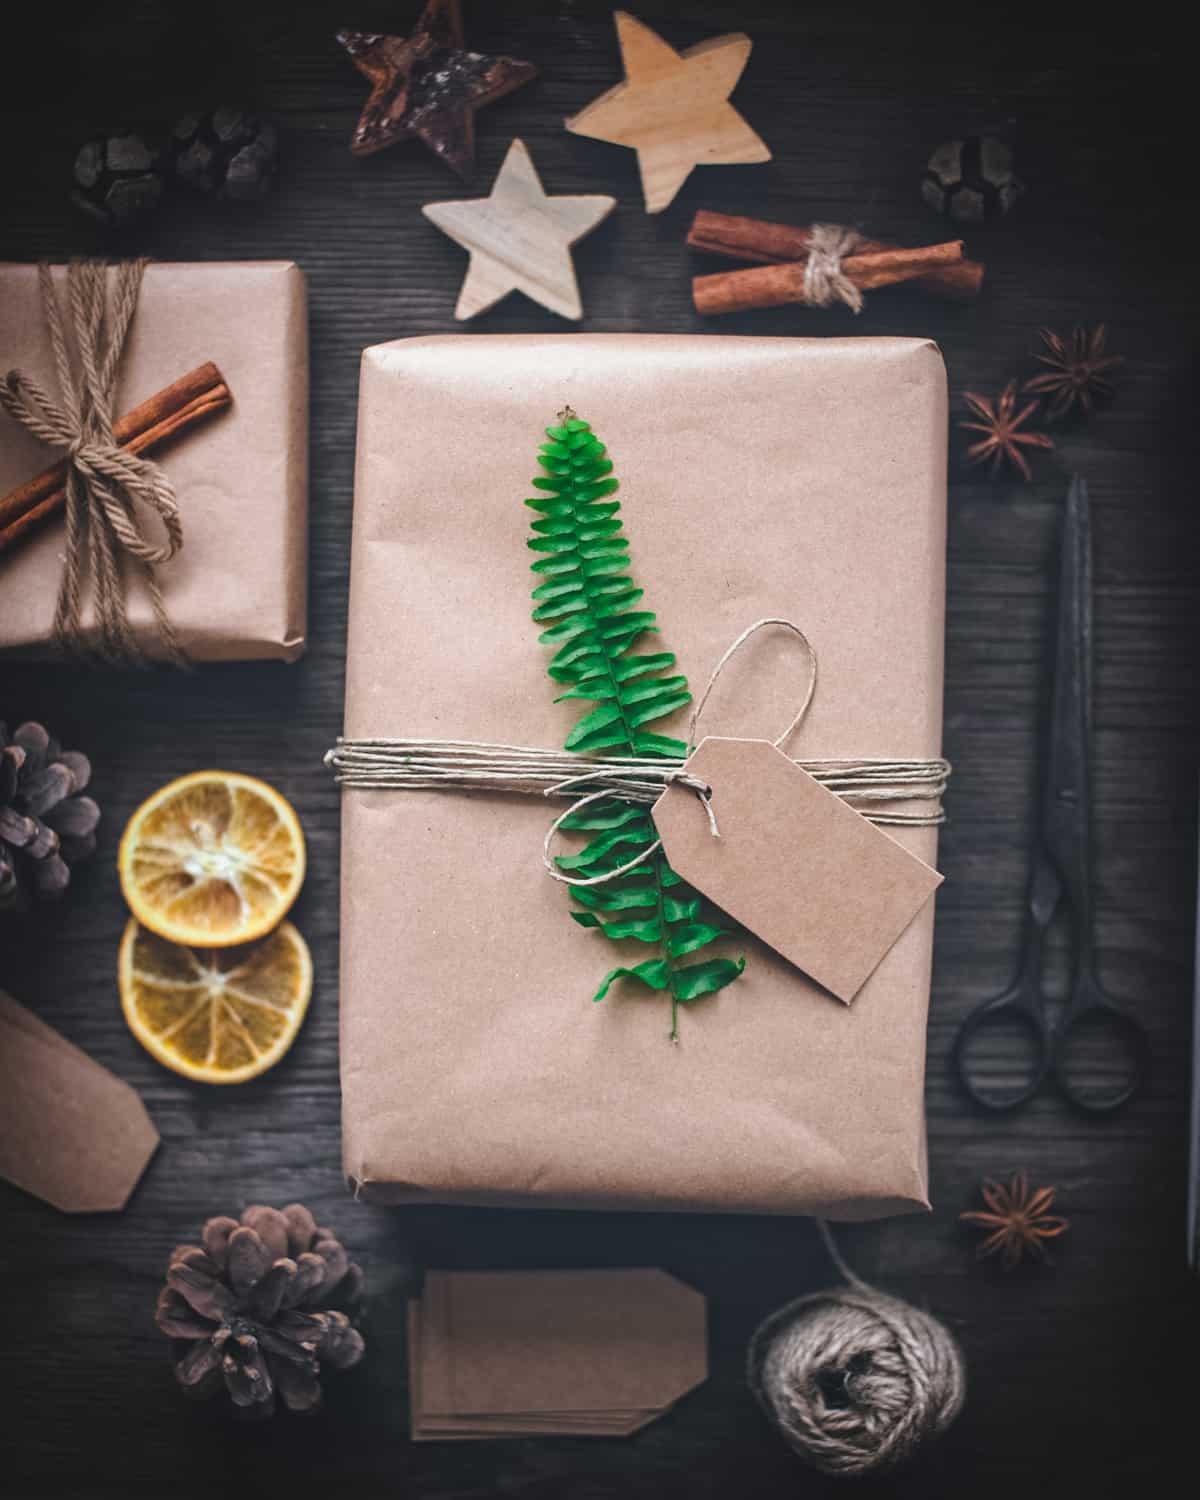 Dark wood background, with one small present wrapped in plain brown paper that is tied with natural twine and a cinnamon stick on top, and a second larger rectangle present wrapped in plain brown paper with a natural twine and a small brown tag, topped with a green fern leaf. Presents are surrounded by: dried orange slices, pine cones, black rustic scissors, a ball of twine, a star anise, brown gift tags, cinnamon sticks, and 3 wooden star cut outs. 